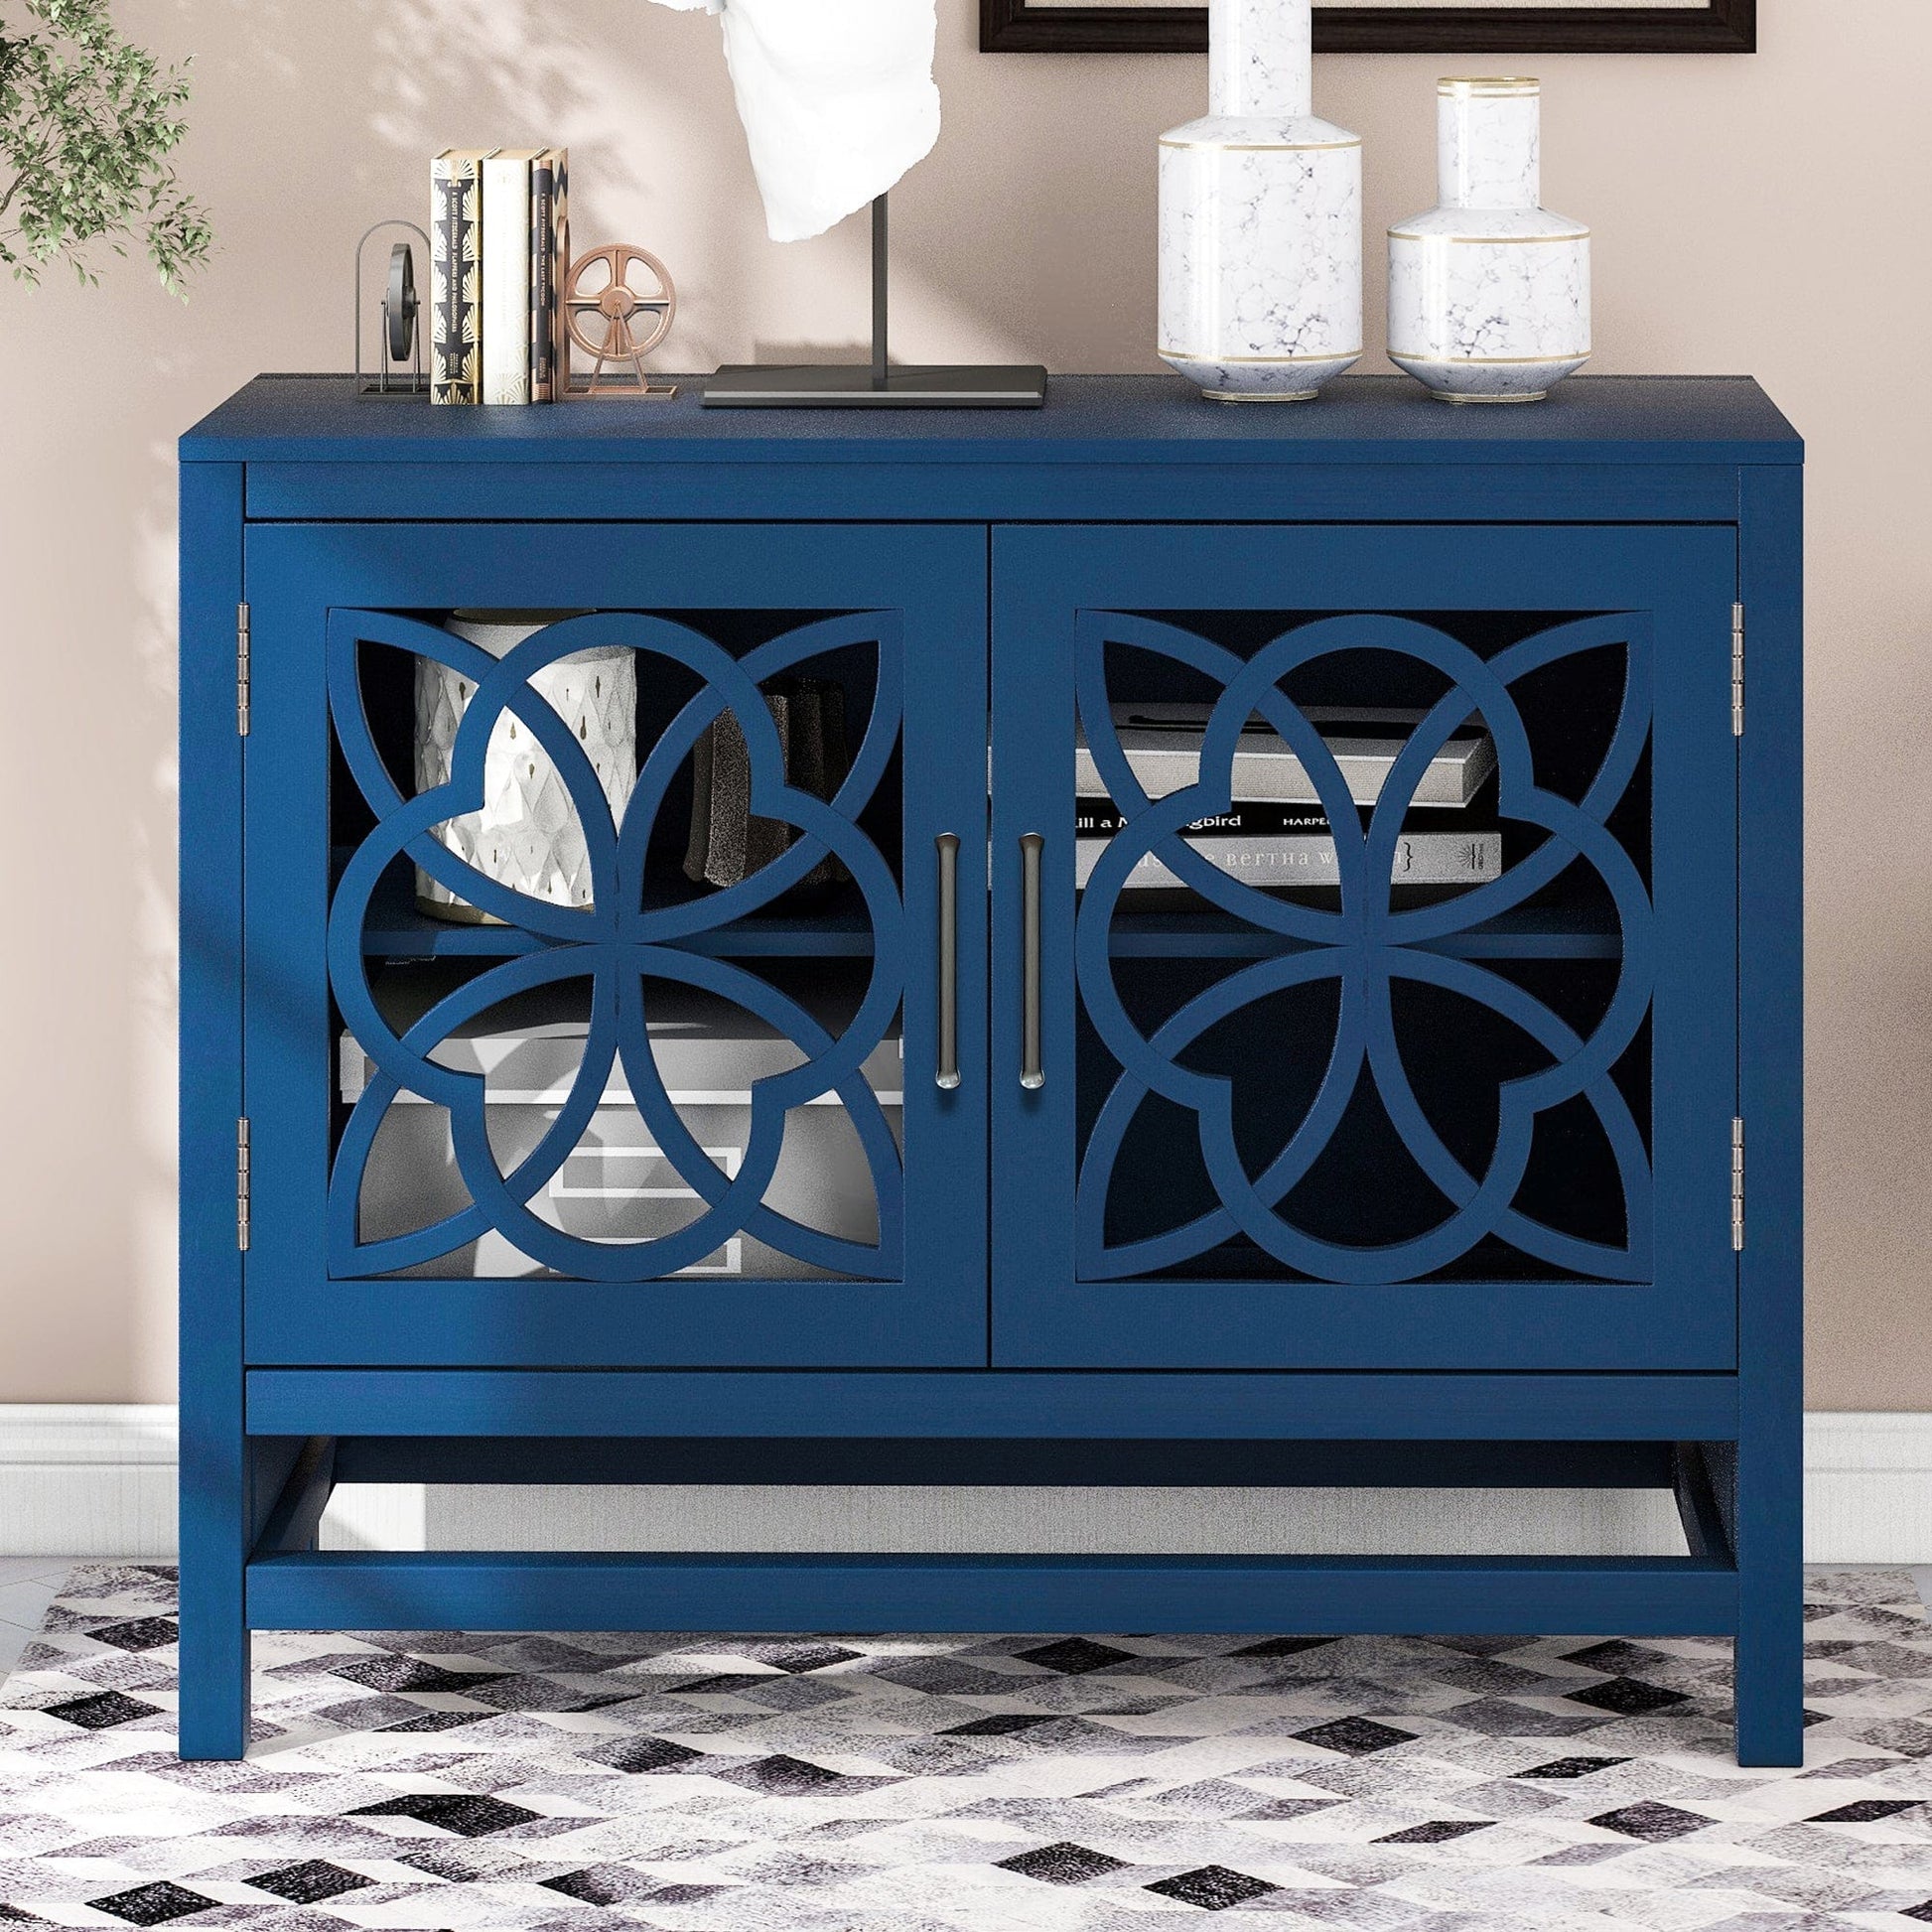 1st Choice Furniture Direct Cabinet 1st Choice U-Shaped Navy Blue Wood Cabinet with Adjustable Shelves